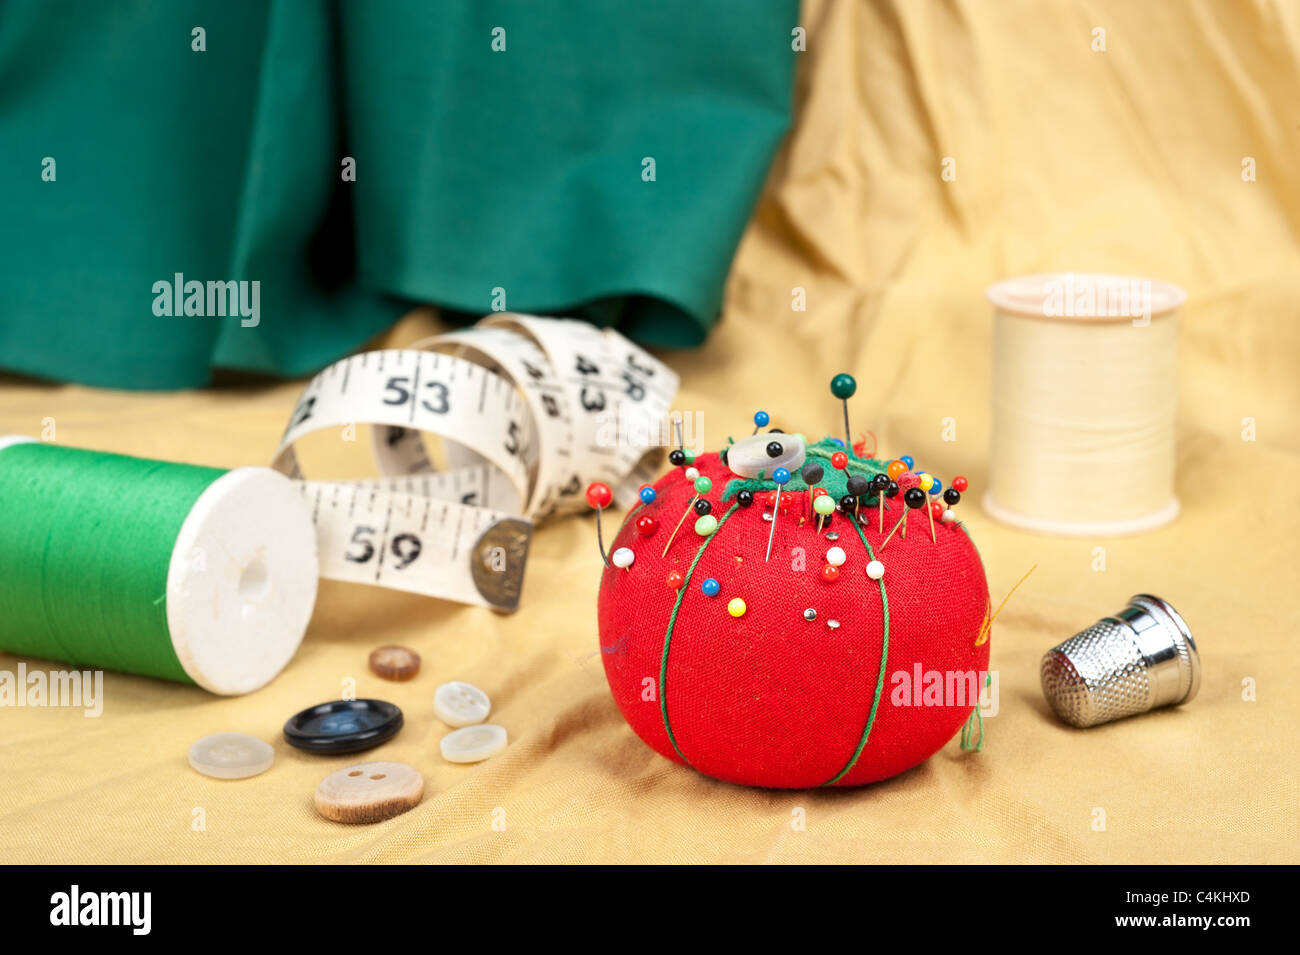 A sewing table with buttons, pin cushion, tape measure and thimble. Stock Photo